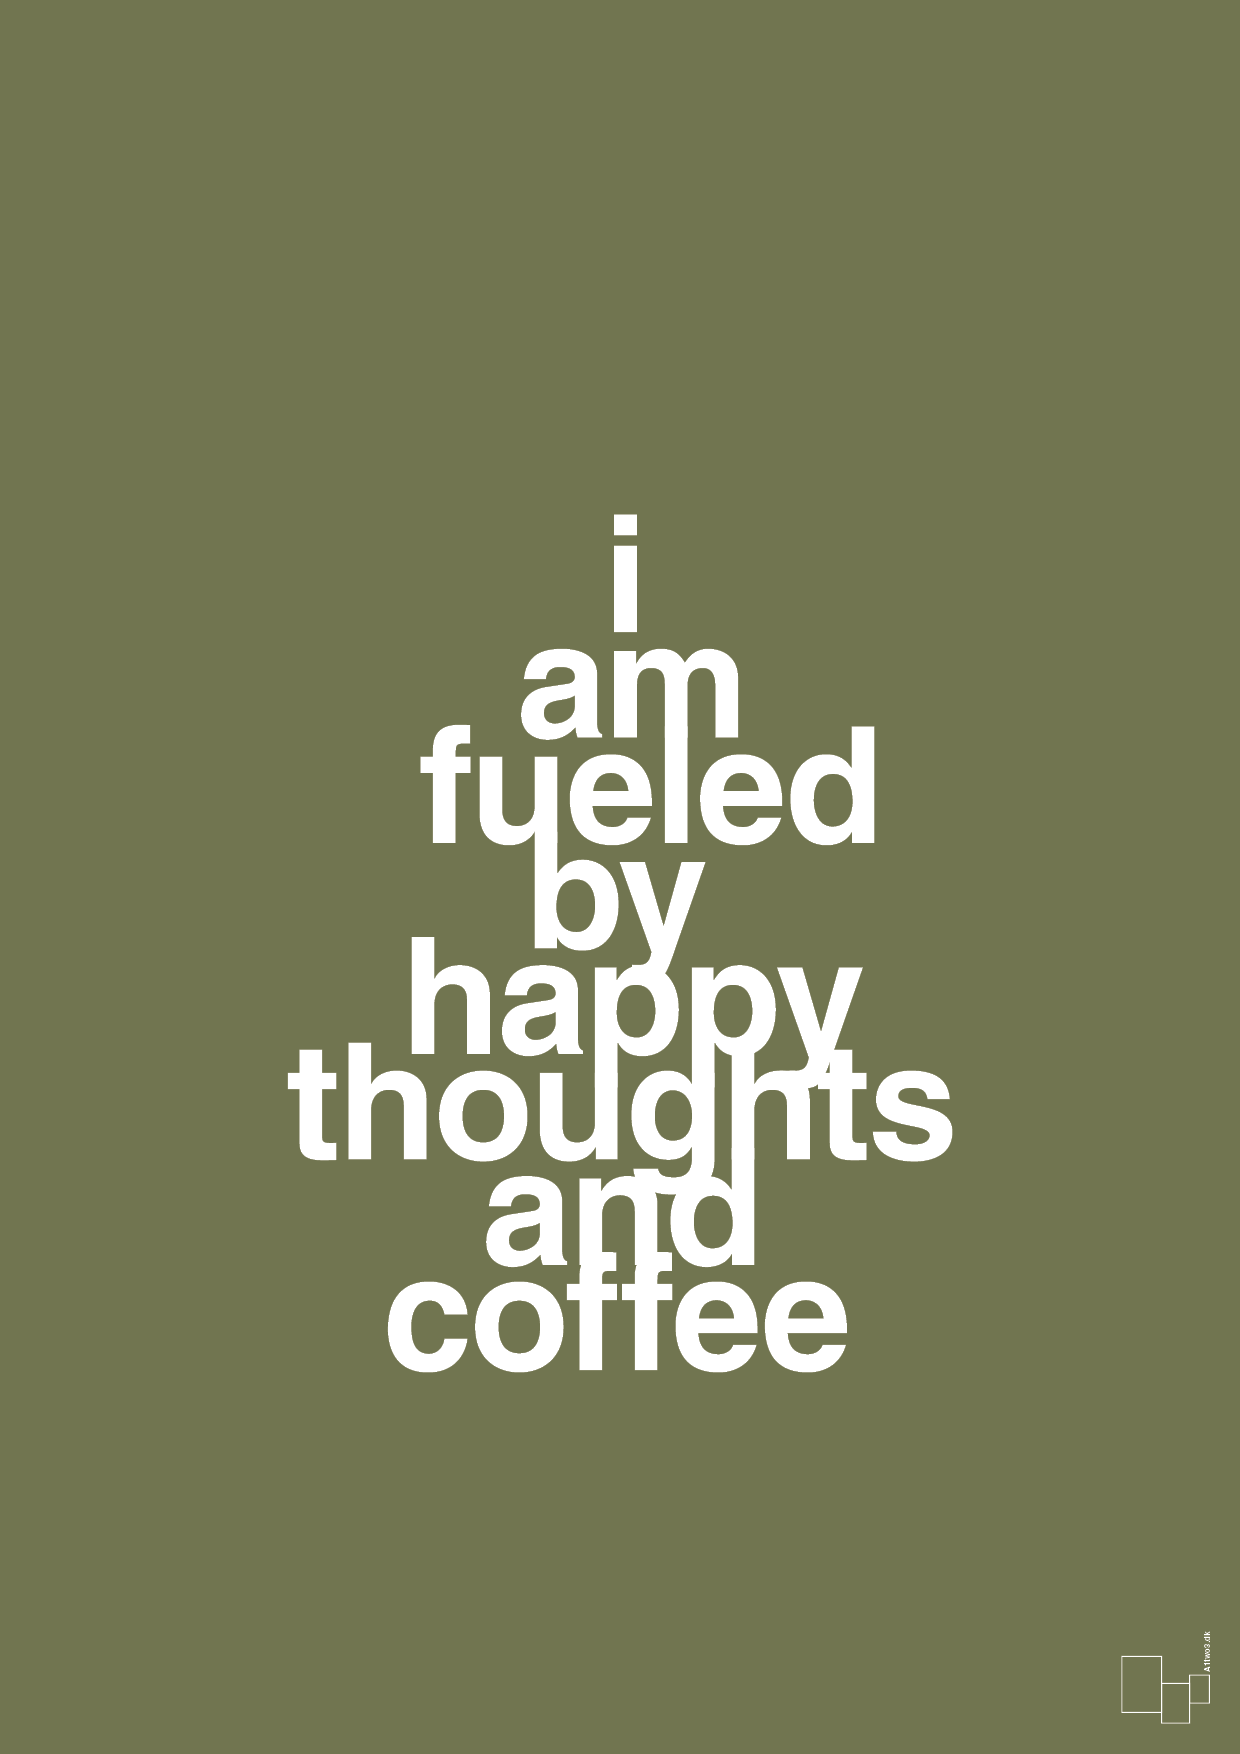 i am fueled by happy thoughts and coffee - Plakat med Mad & Drikke i Secret Meadow